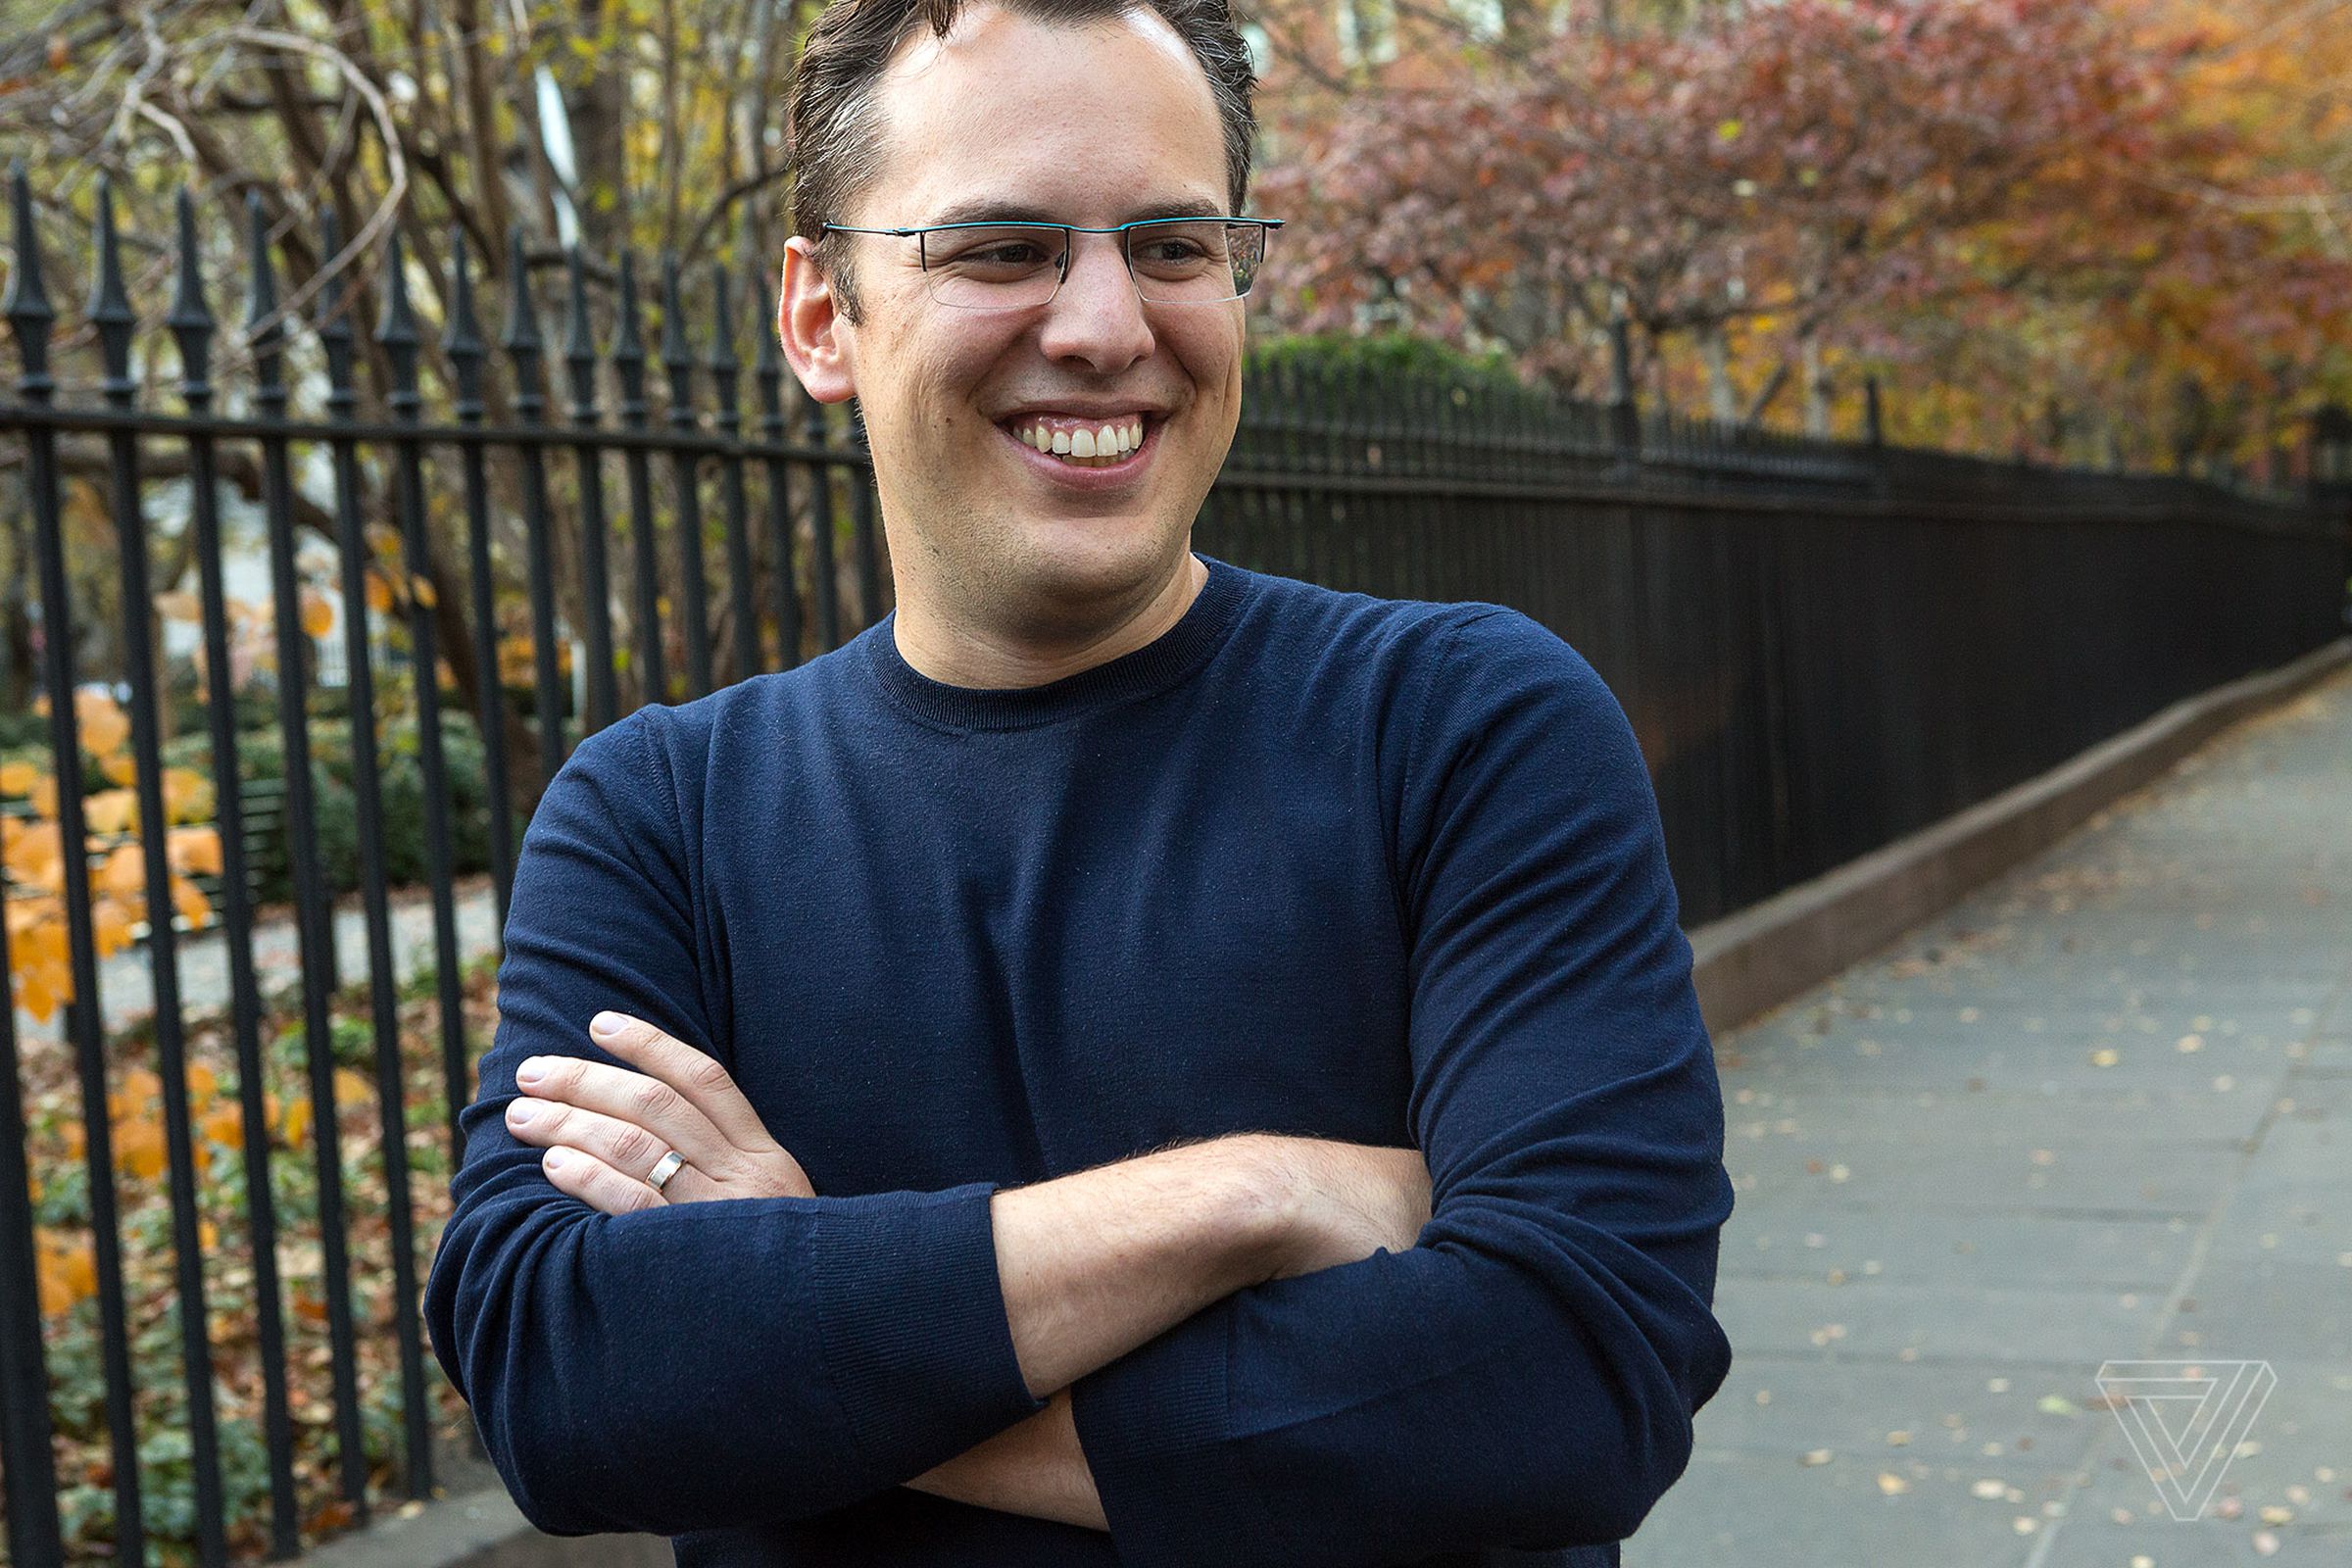 Mike Krieger, Instagram co-founder, photographed outside of Gramercy Park, New York.